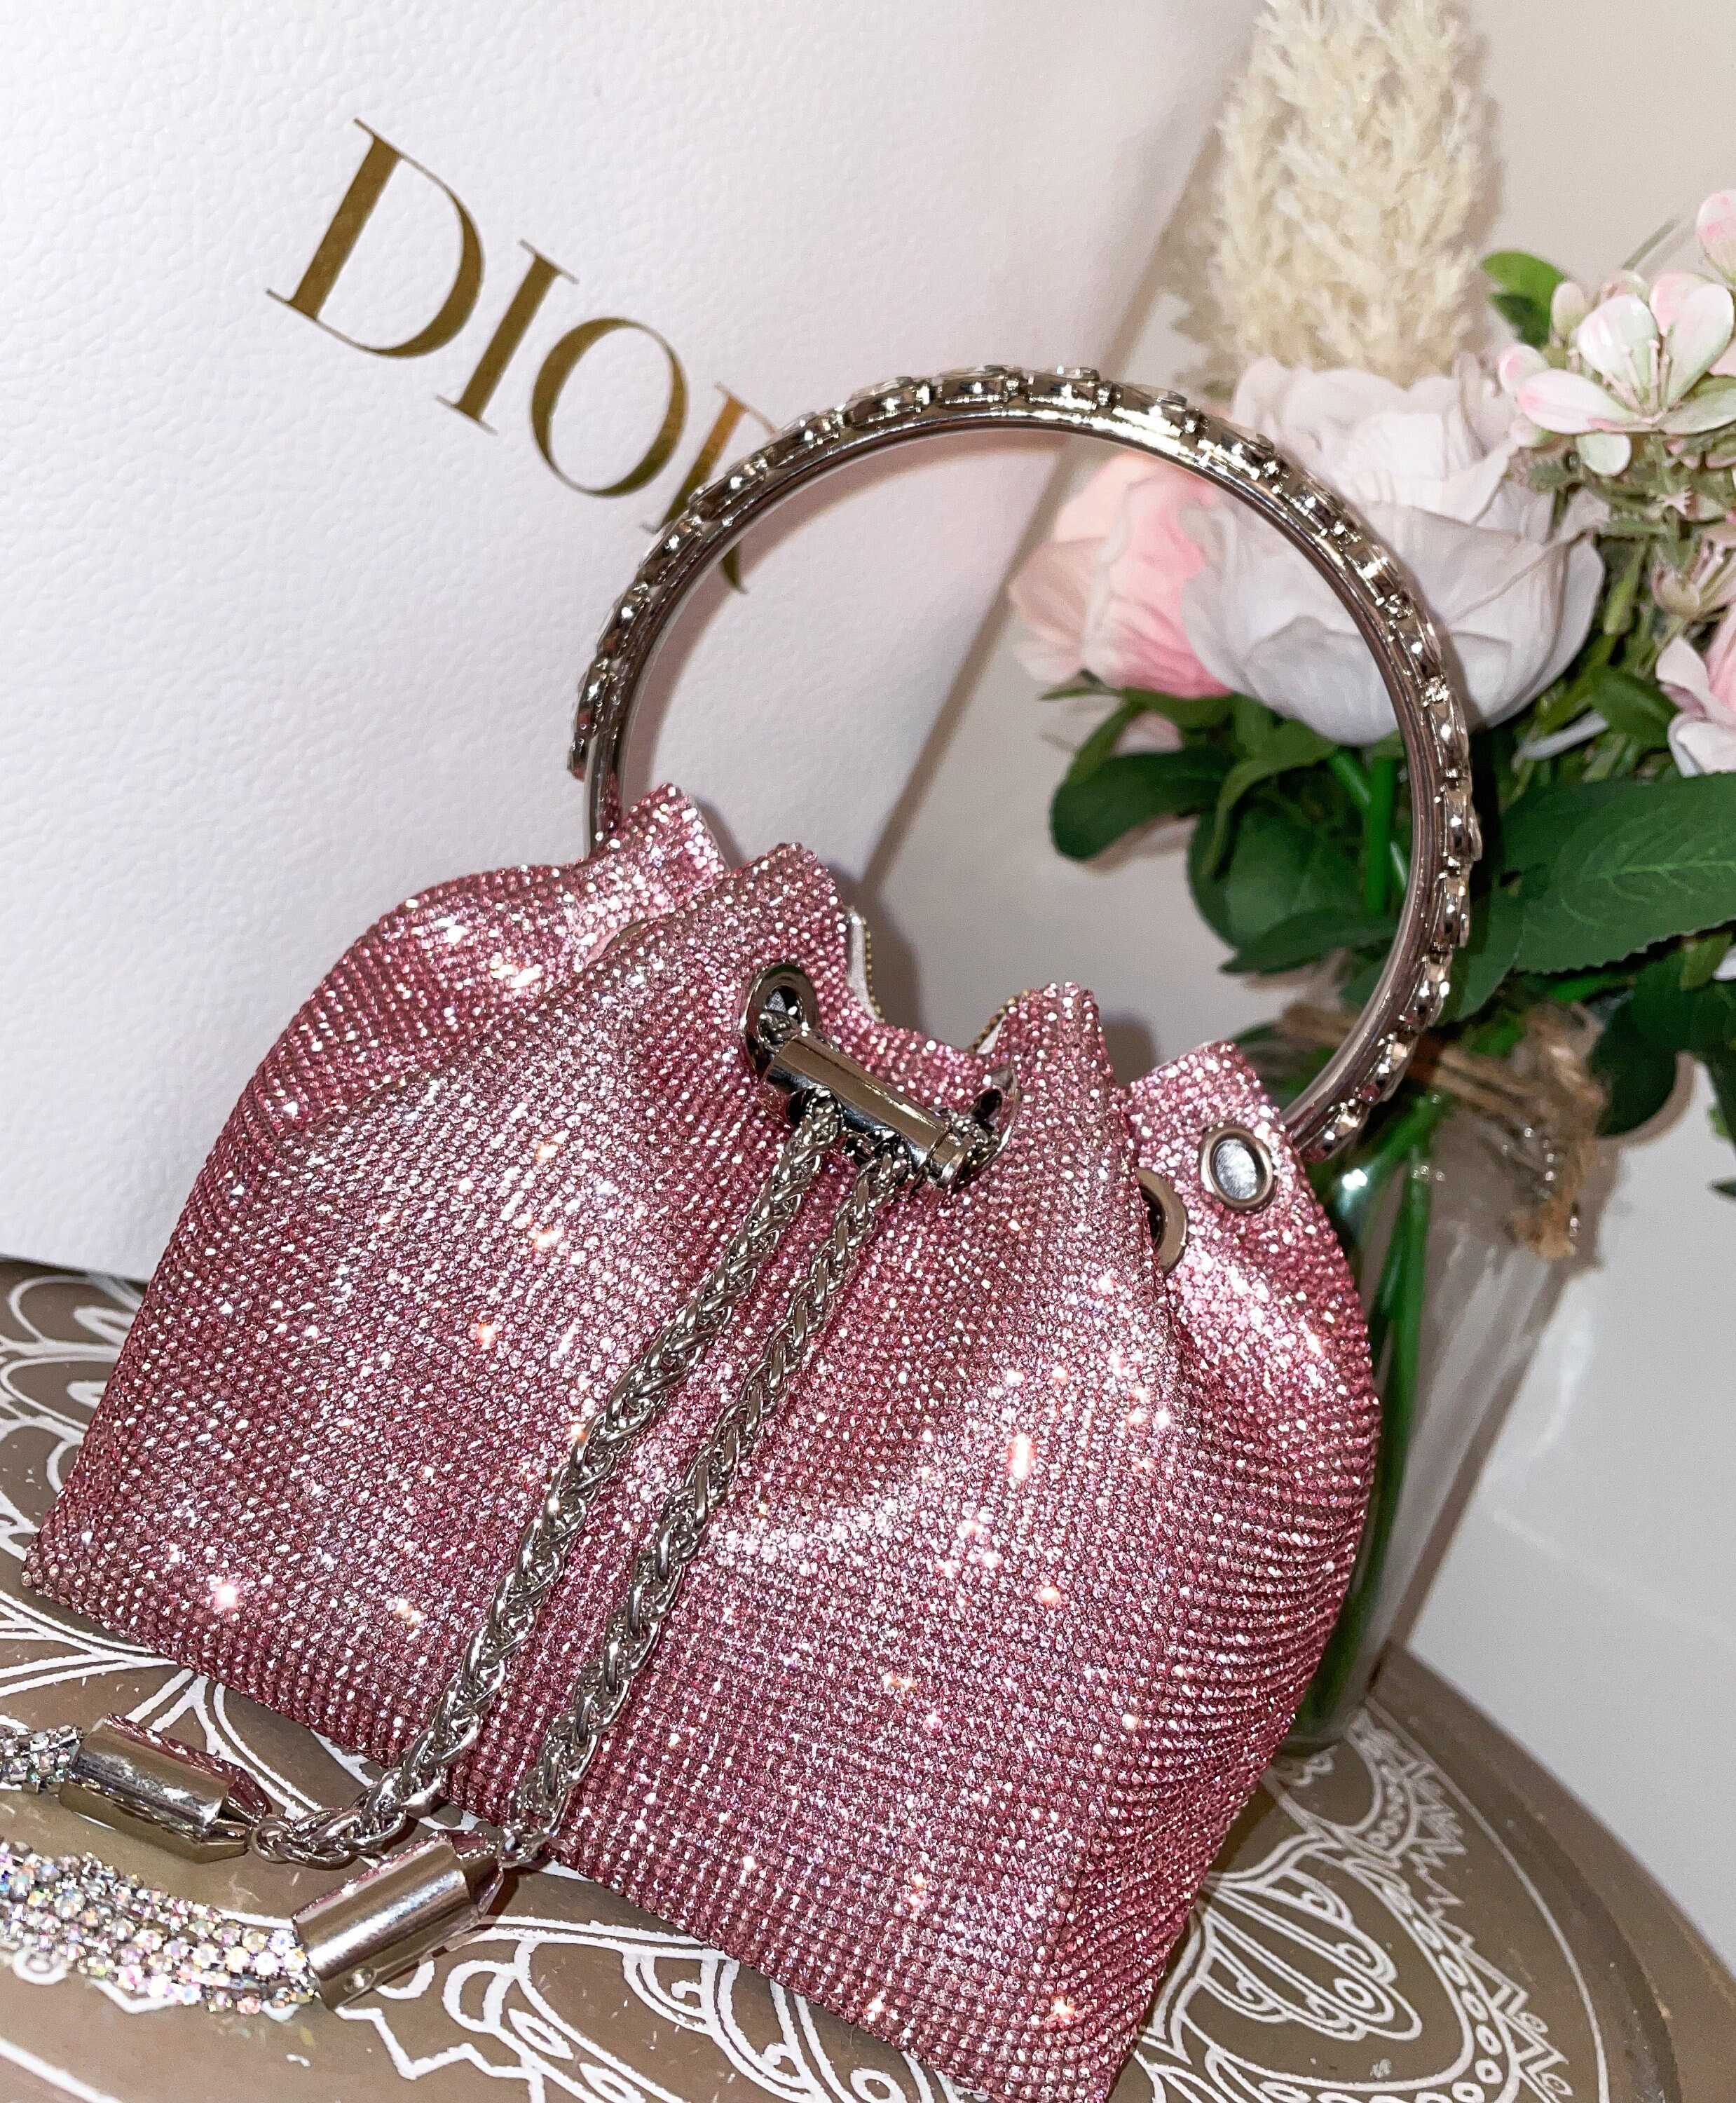 Lady Dior Micro Bag Pink Strass-Embroidered Satin